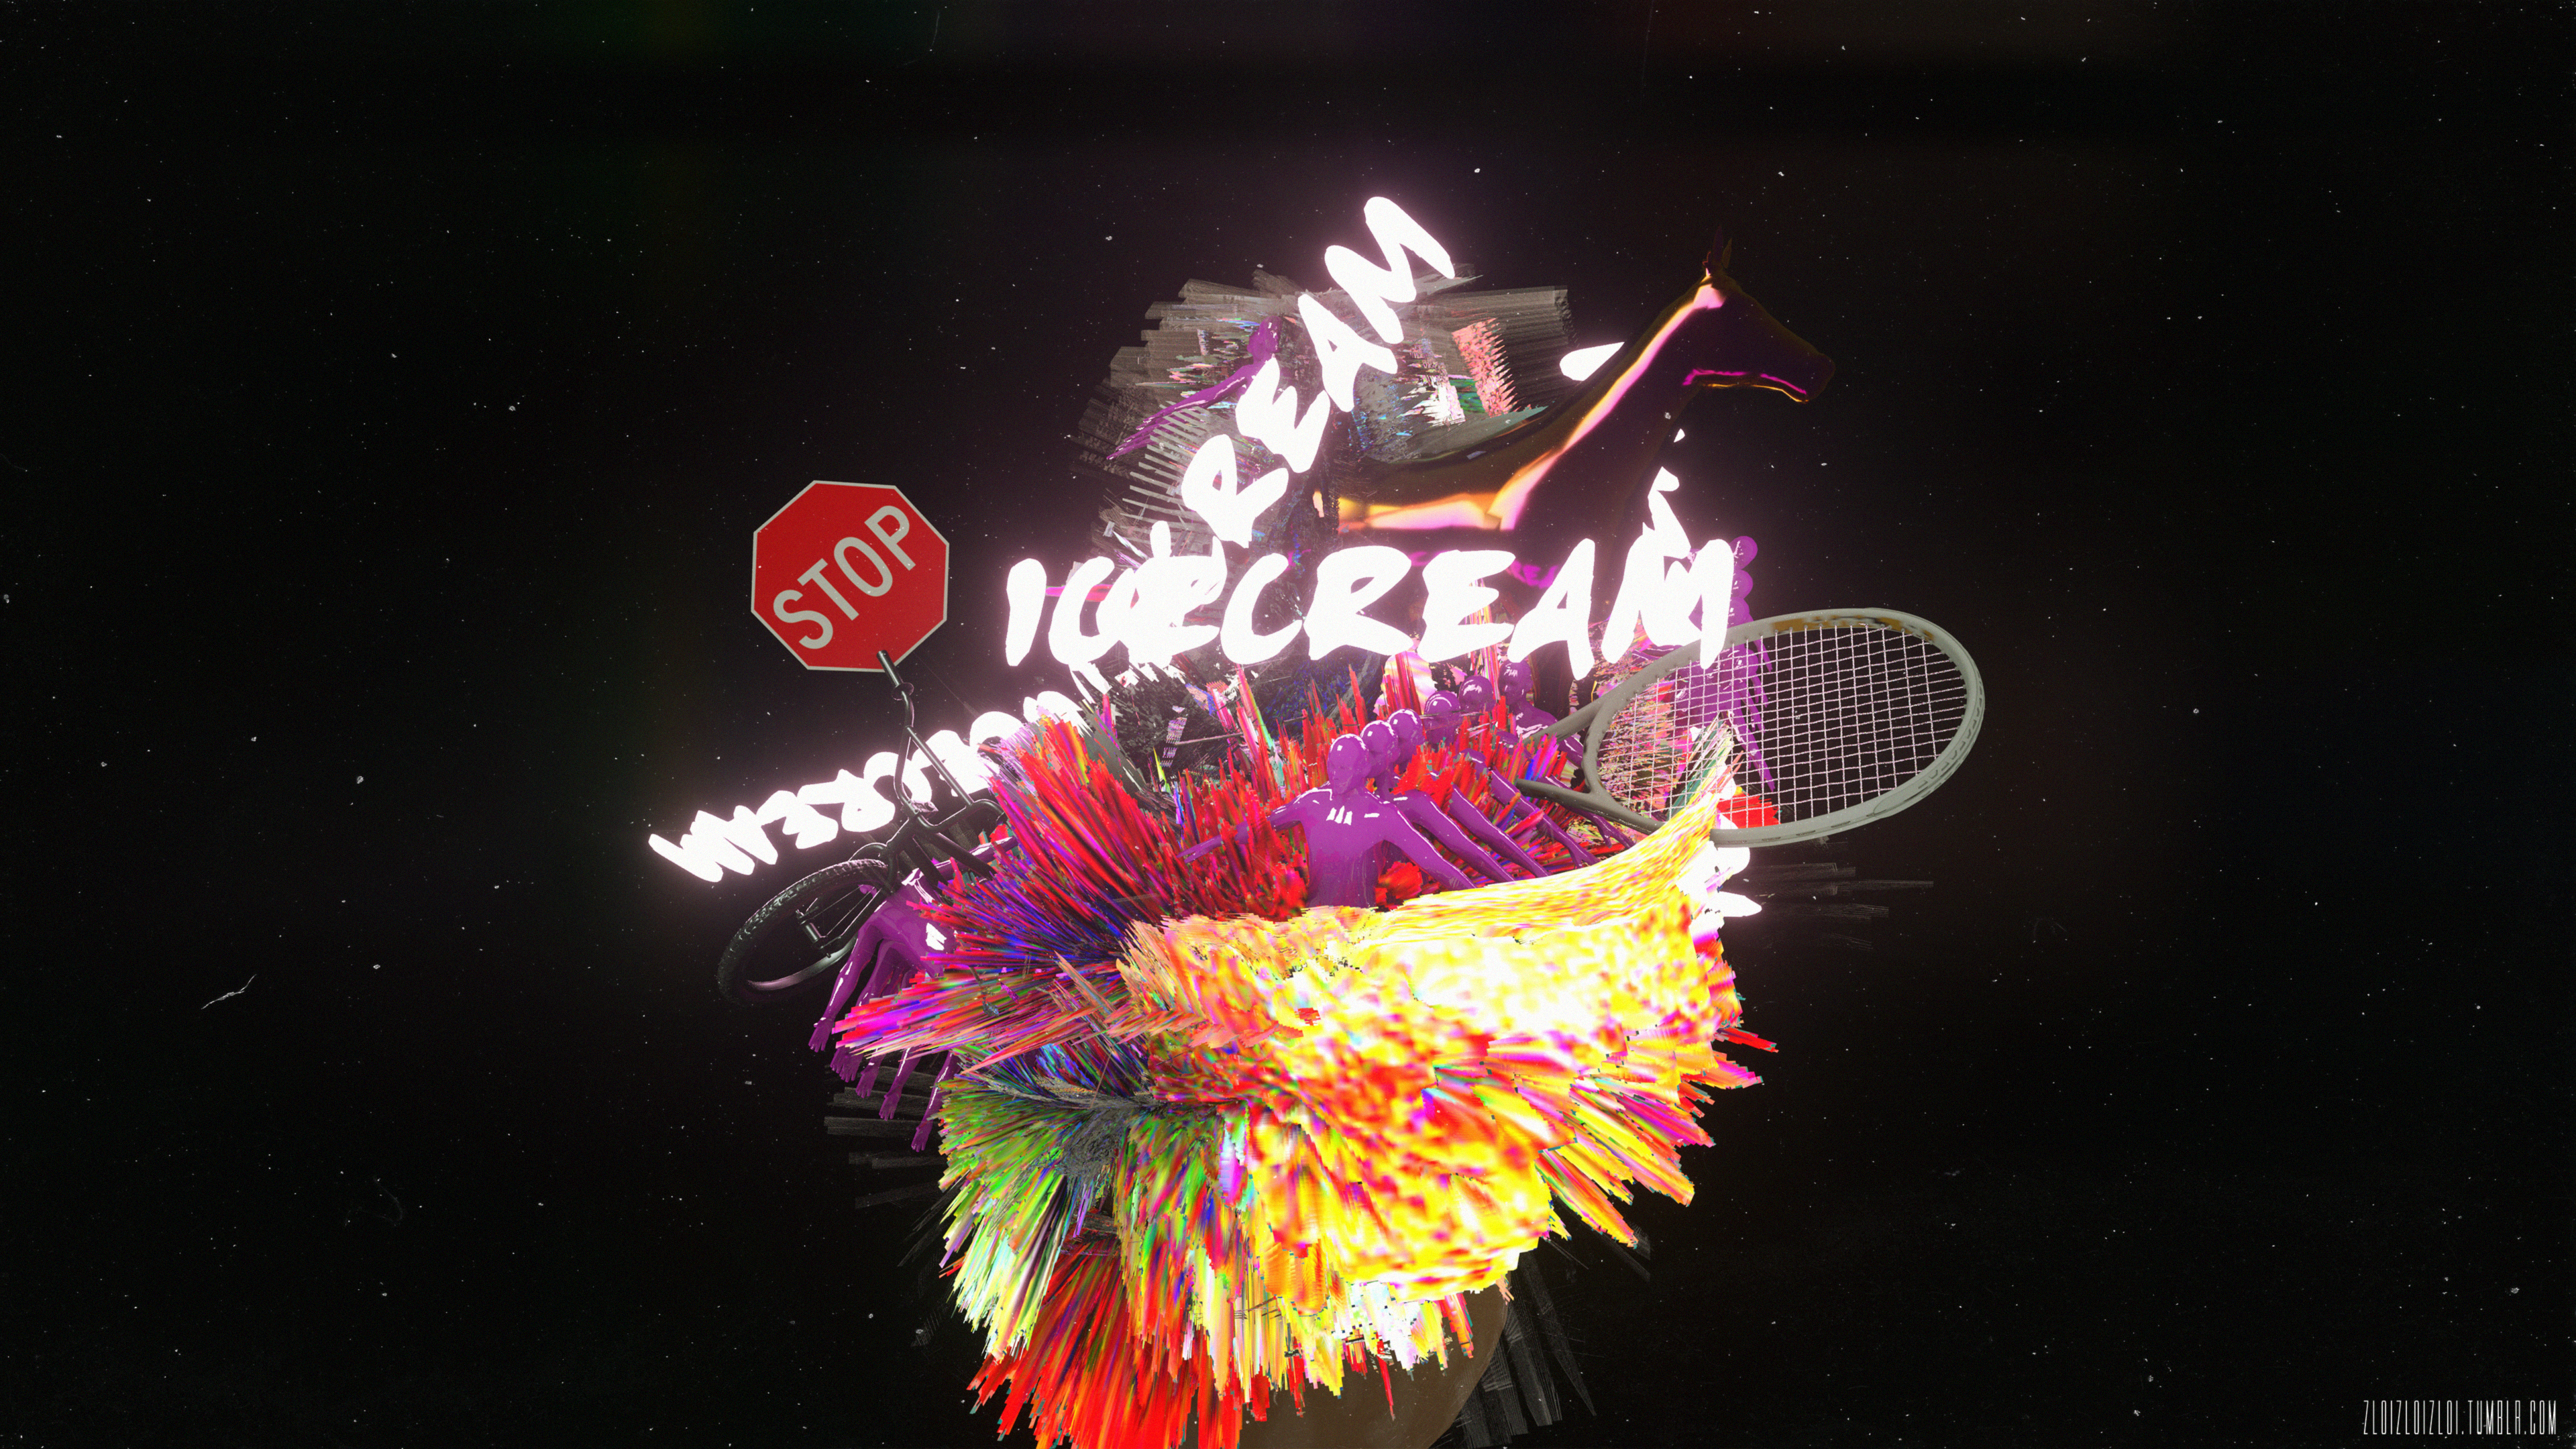 Glitch Art 3D Abstract Cinema 4D Psychedelic Webpunk Humor 3840x2160